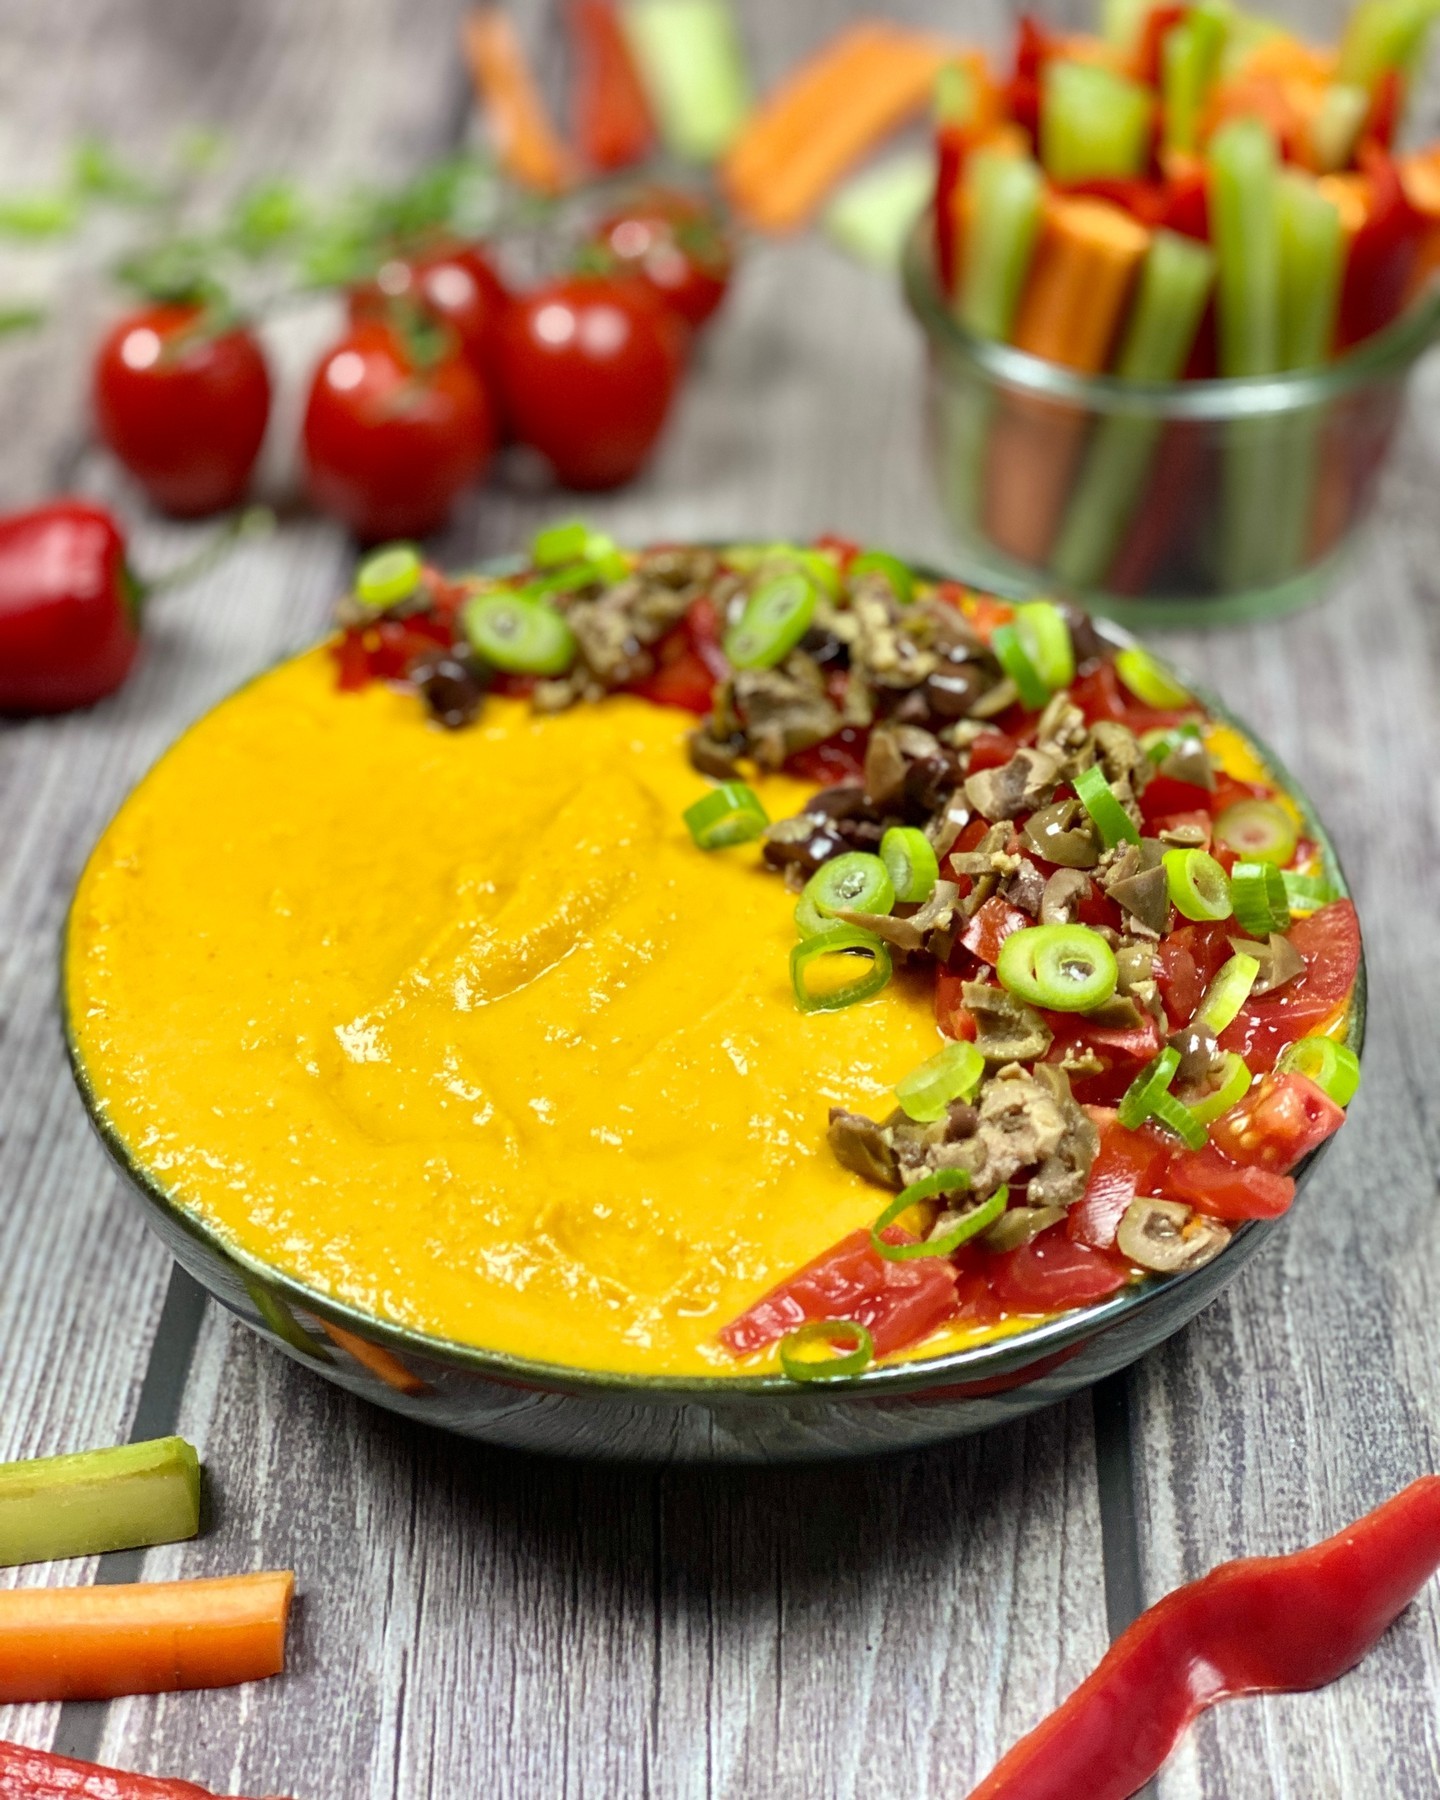 RECIPE TIME | SAVE AND SHARE THIS POST⁠
⁠
Dips and dressings are both amazing and I love them dearly. If you love them too, then this is your lucky day, because it’s recipe share time.⁠
⁠
Sweet pepper dip⁠
⁠
2 orange bell peppers, chopped⁠
1/2 cup zucchini, peeled and chopped⁠
1/4 cup oil free sundried tomatoes, soaked⁠
1/4 cup tahini⁠
1 small garlic clove, minced (optional)⁠
2 tbsp lime juice⁠
2 tbsp soak water sundried tomatoes⁠
⁠
Add the ingredients to a high speed (vacuum) blender and blend until smooth. ⁠
⁠
Serve with fresh non sweet fruit and veggies and dip away. Enjoy!⁠
⁠
Don’t forget to save and share this post 💛⁠
⁠
xx⁠
⁠
#rawvegan #veganfit #vegan #motivation #health #lifestyle #rawveganrecipe #inspiration #rawfood #rawplantbased #freerecipe #voedingsdeskundige #gezondedarmen #plantaardig #veganfood #plantbased #fruit #lactosefree #soyfree #veggies #glutenfree #healthyfood #recipeshare #plantpower #sweetpepperdip #glutenvrij #healthygut #sosfree #weightloss #rawfoodfeast